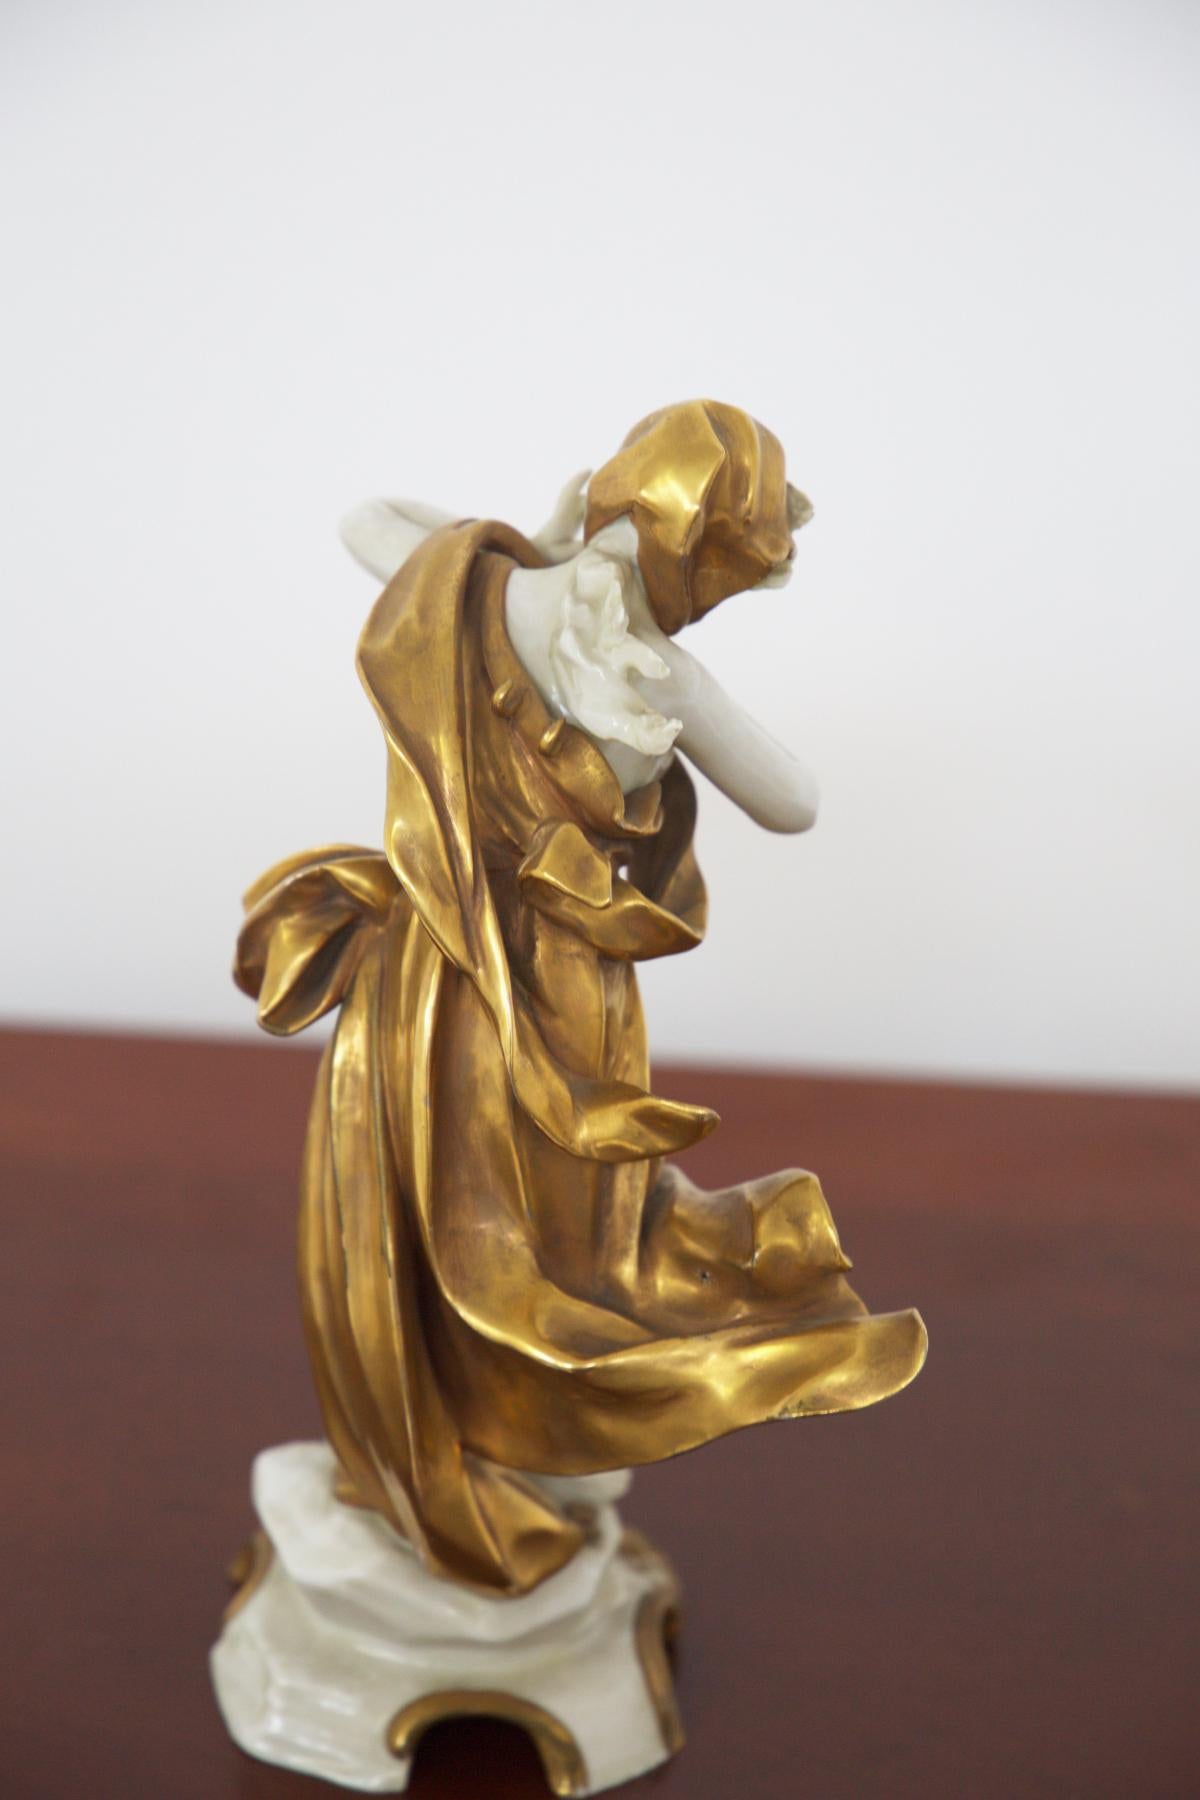 A beautiful ceramic figurine, part of the 'Signs of the Zodiac' collection, made in the early 20th century from Capodimonte ceramic painted in gold.
Capodimonte is a type of Italian porcelain first developed in the 18th century. It is known for its